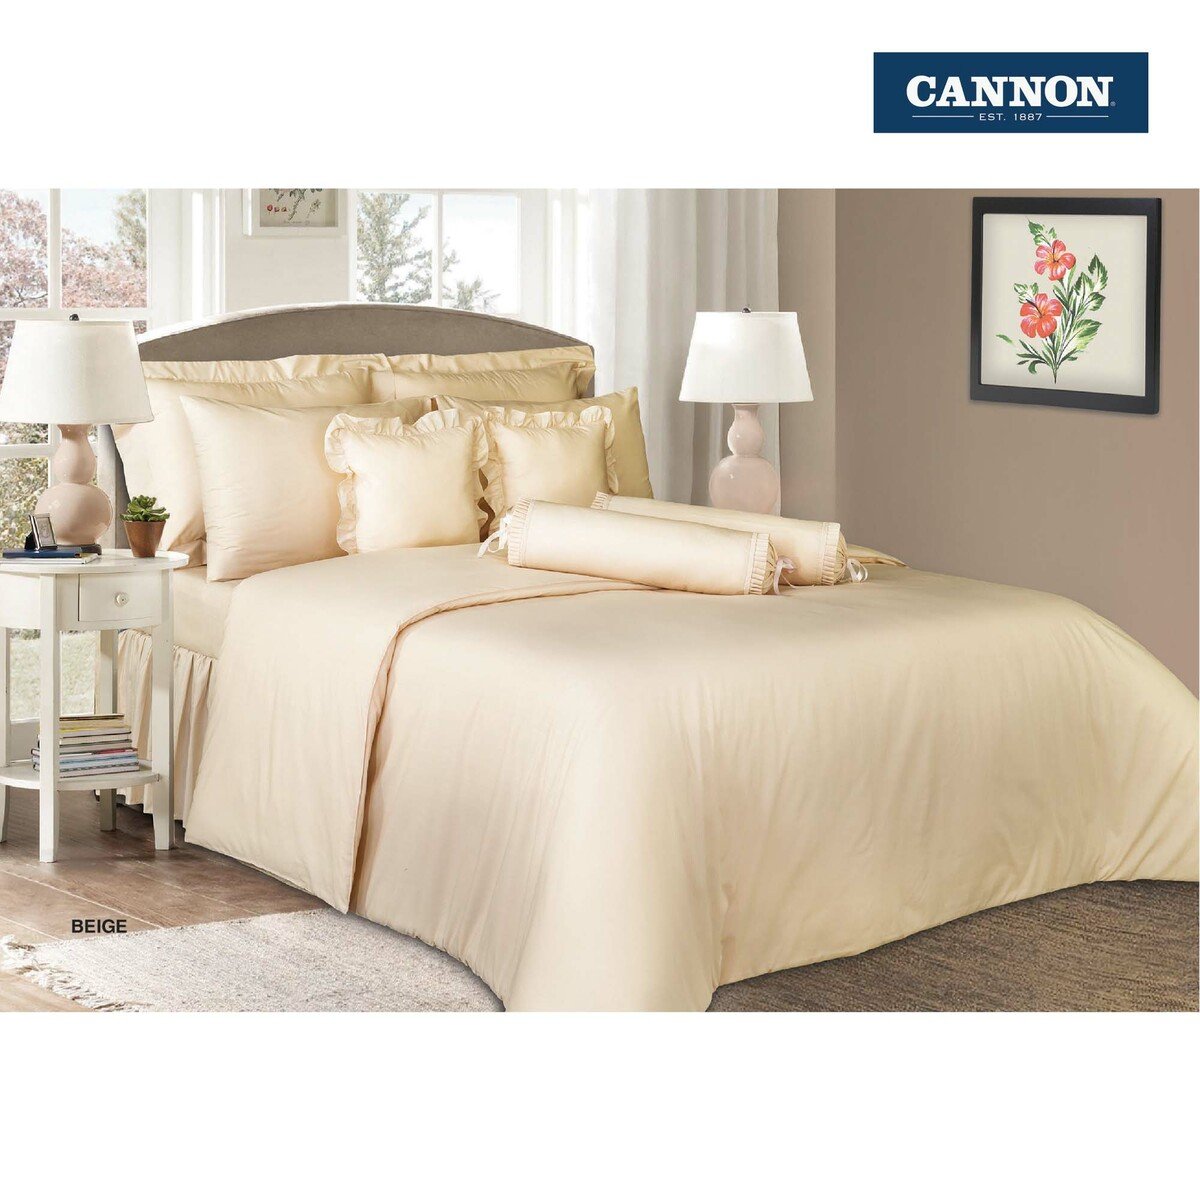 Cannon Fitted Sheet + 2pcs Pillow Cover Plain King Size 200x200cm Beige